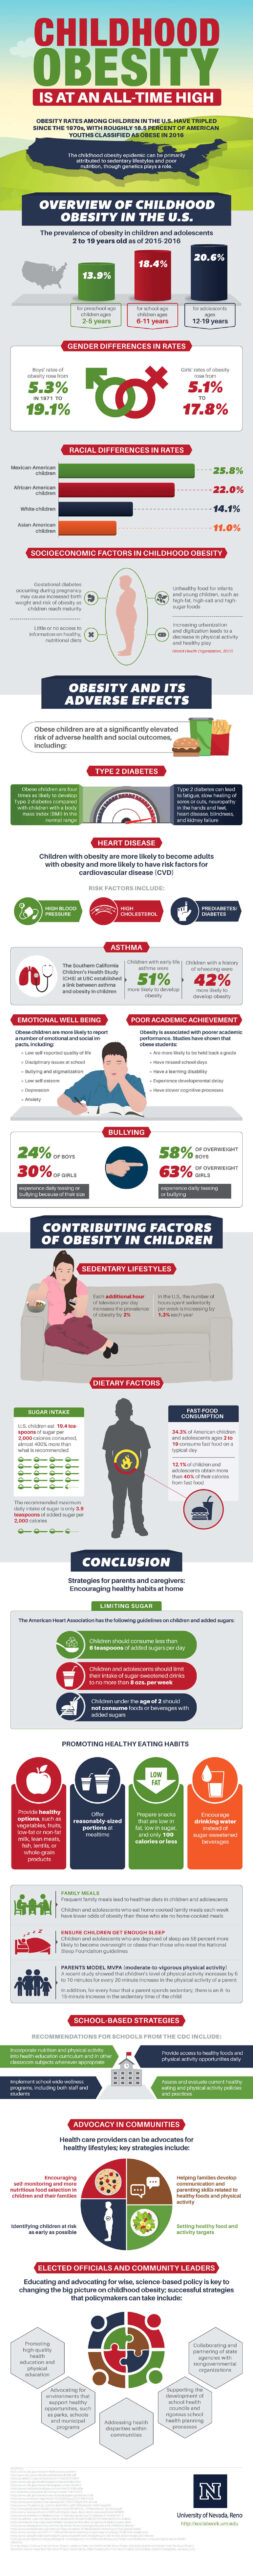 Why Is Childhood Obesity Still On The Rise